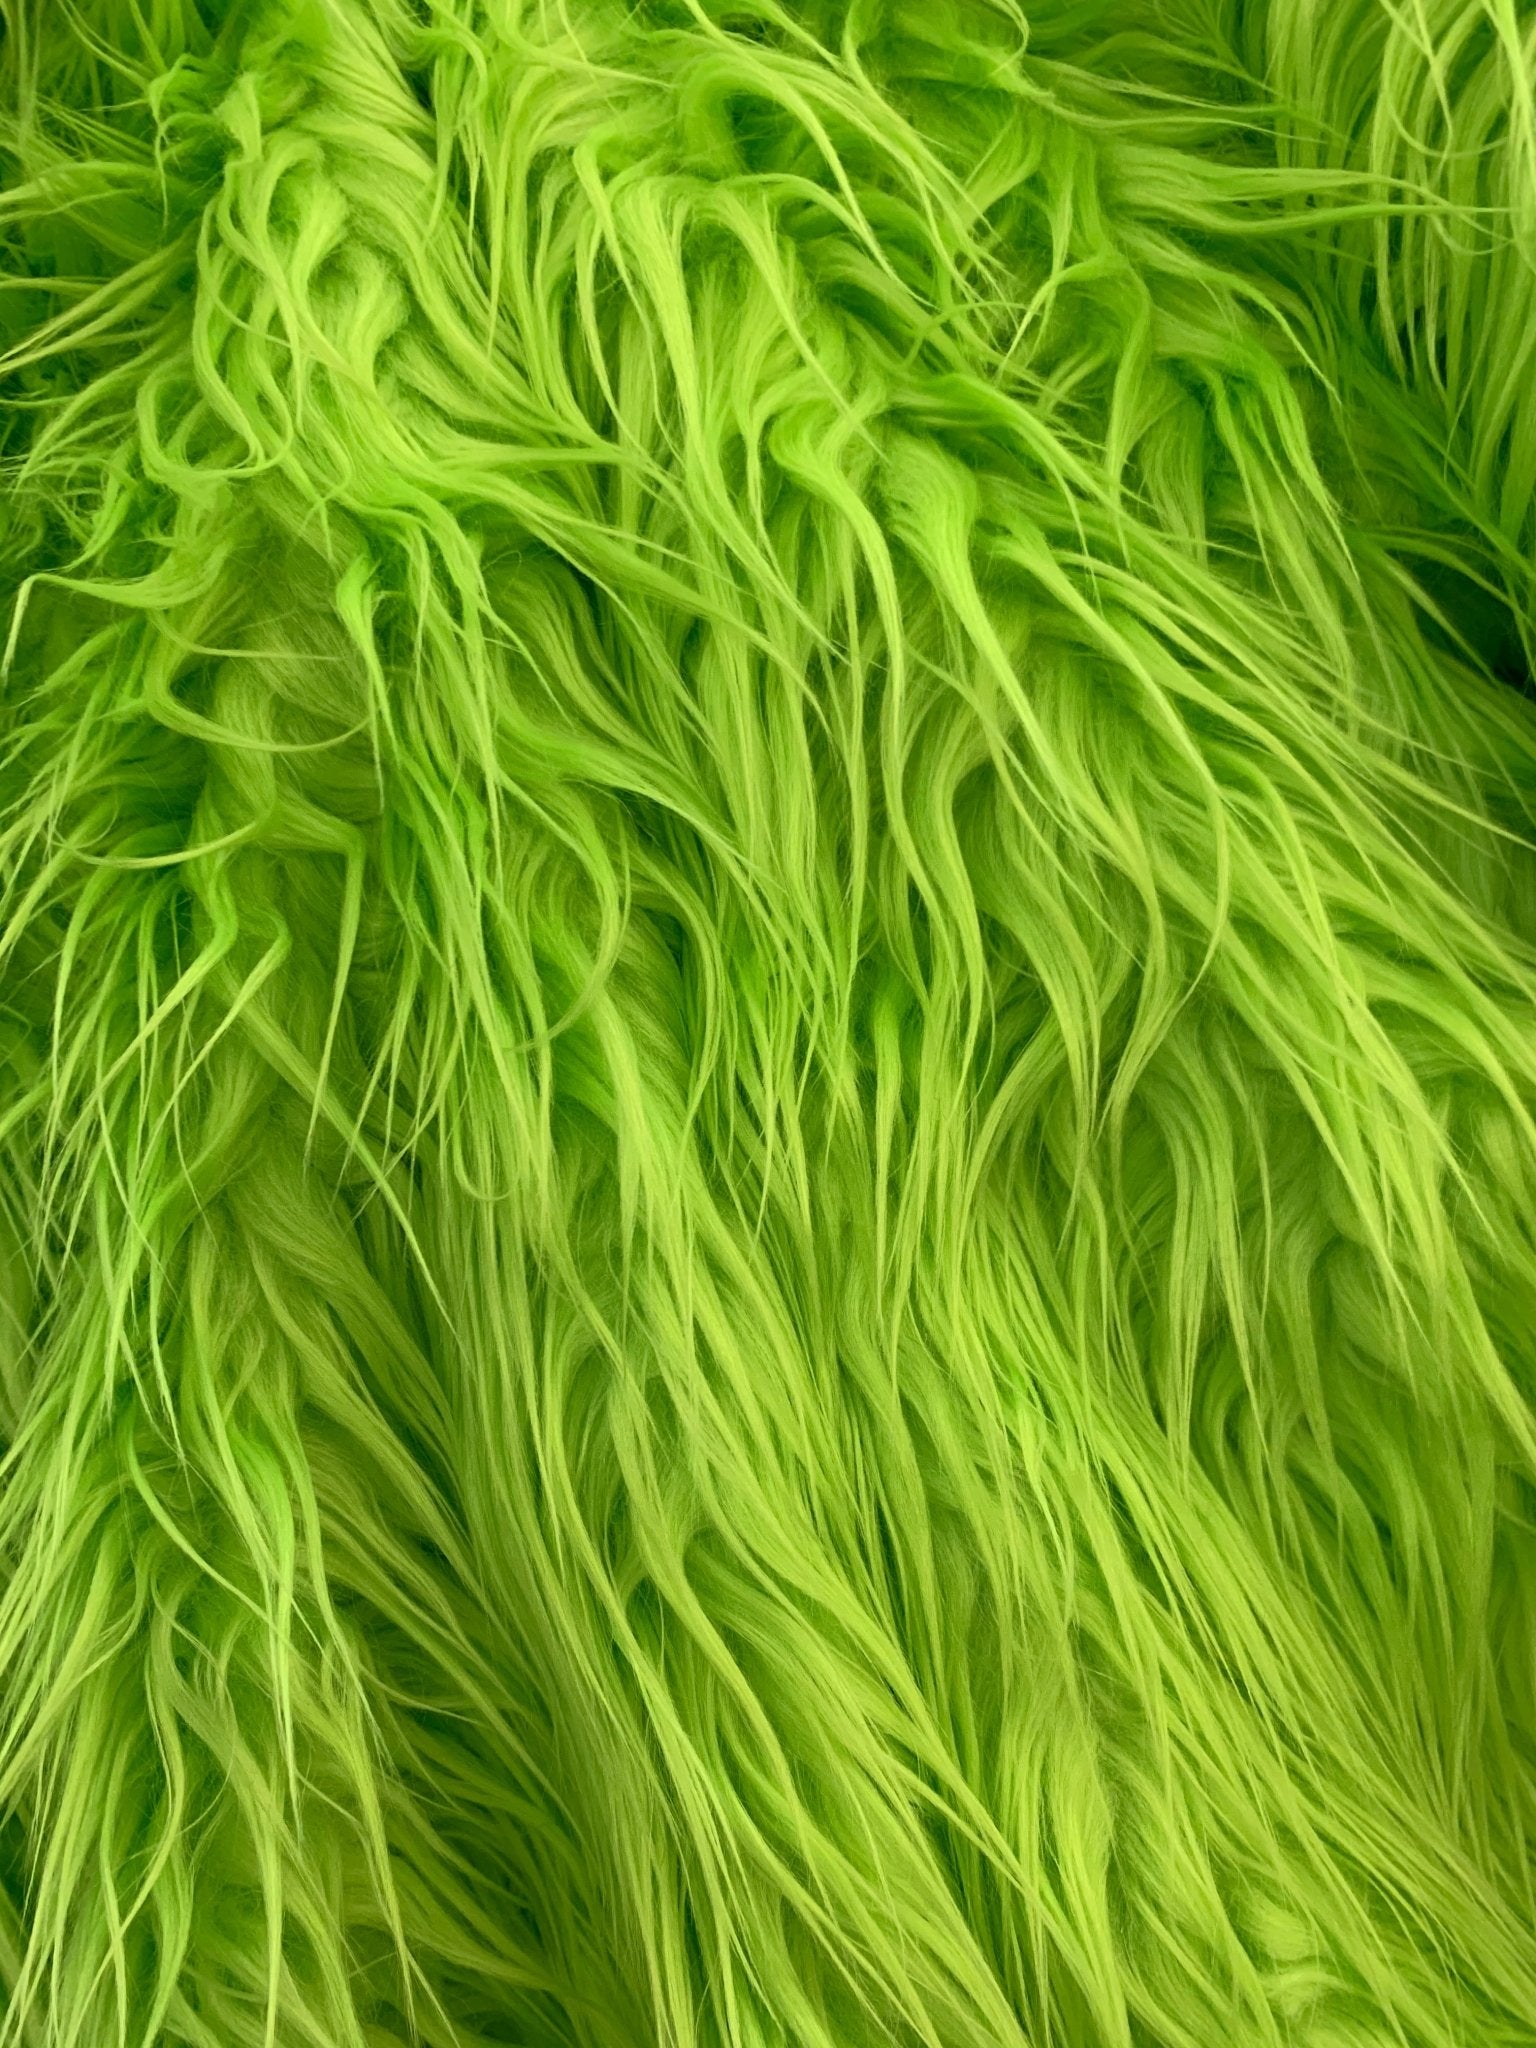 Mongolian Long Pile Fake Faux Fur Fabric Sold By The YardICEFABRICICE FABRICSNeon GreenBy The Yard (60 inches Wide)Mongolian Long Pile Fake Faux Fur Fabric Sold By The Yard ICEFABRIC